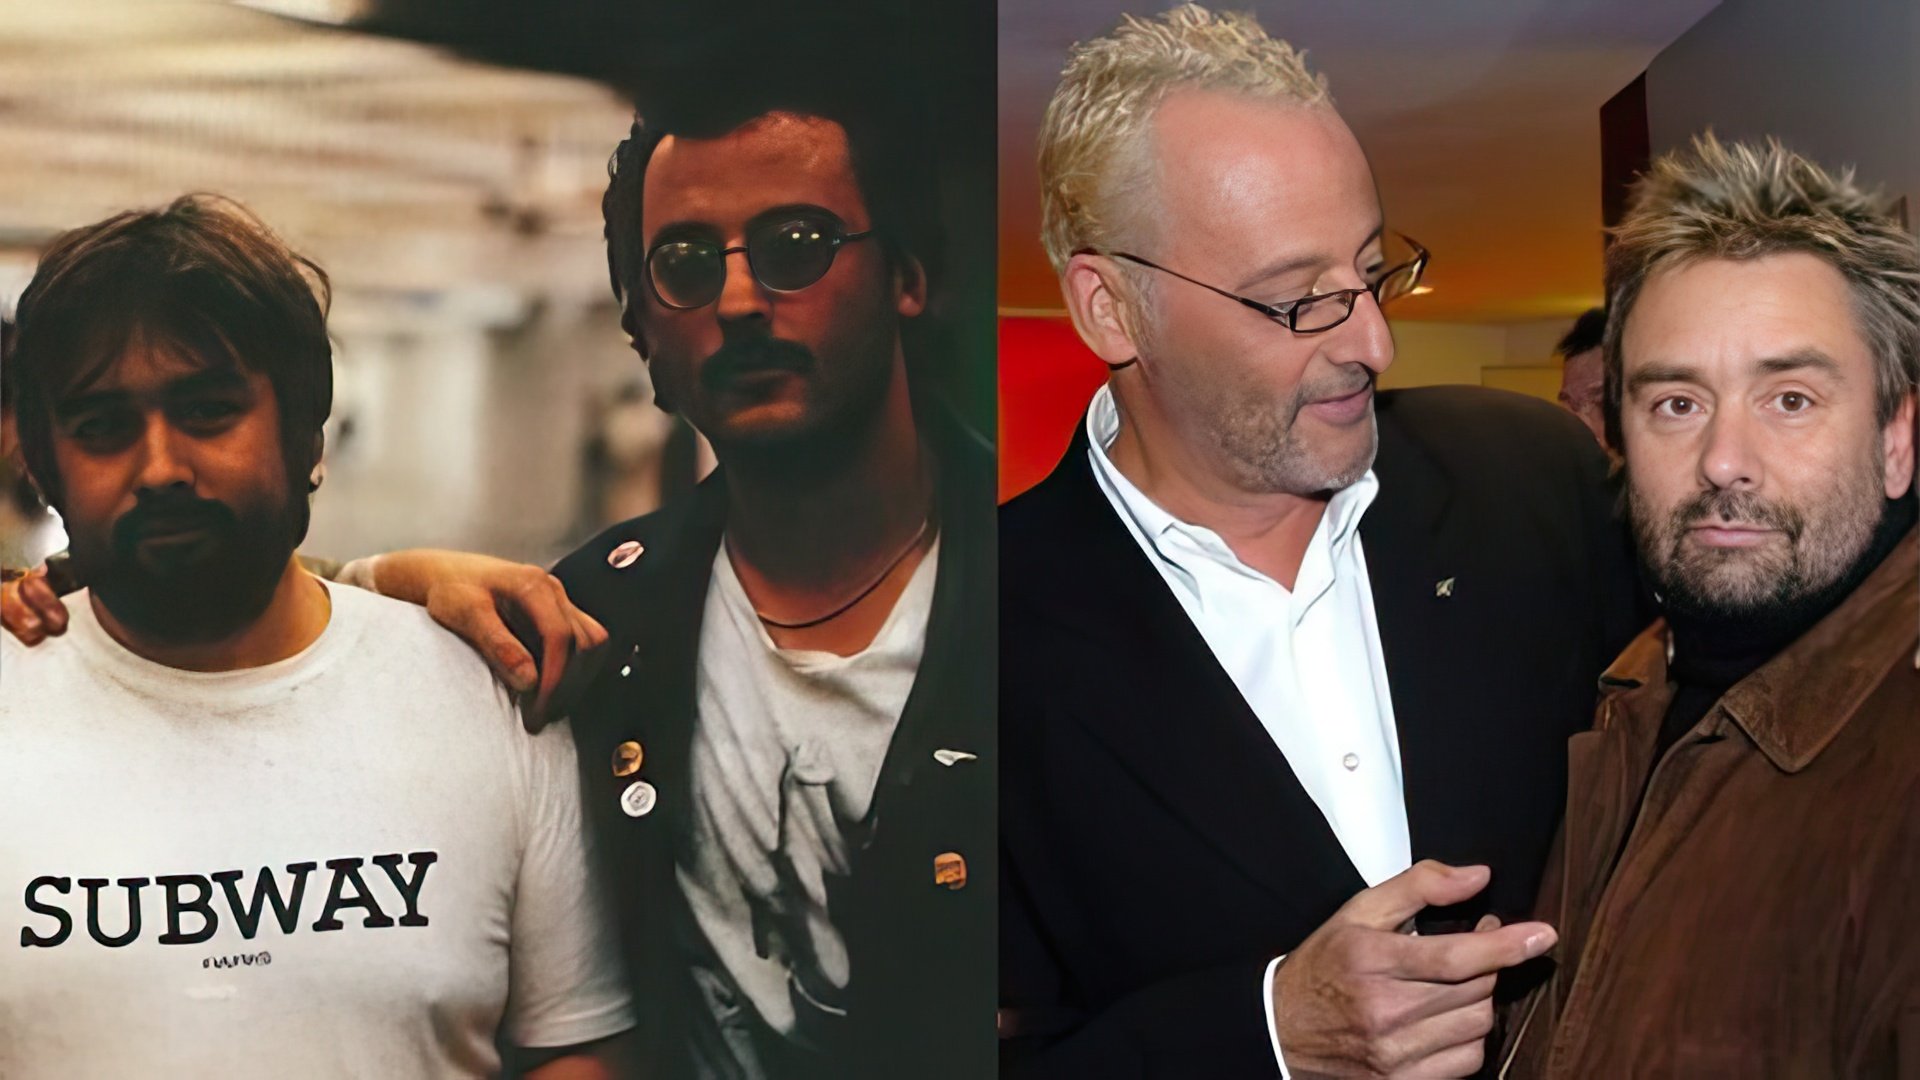 Jean Reno was lucky to meet the «right» film director ‒ Luc Besson